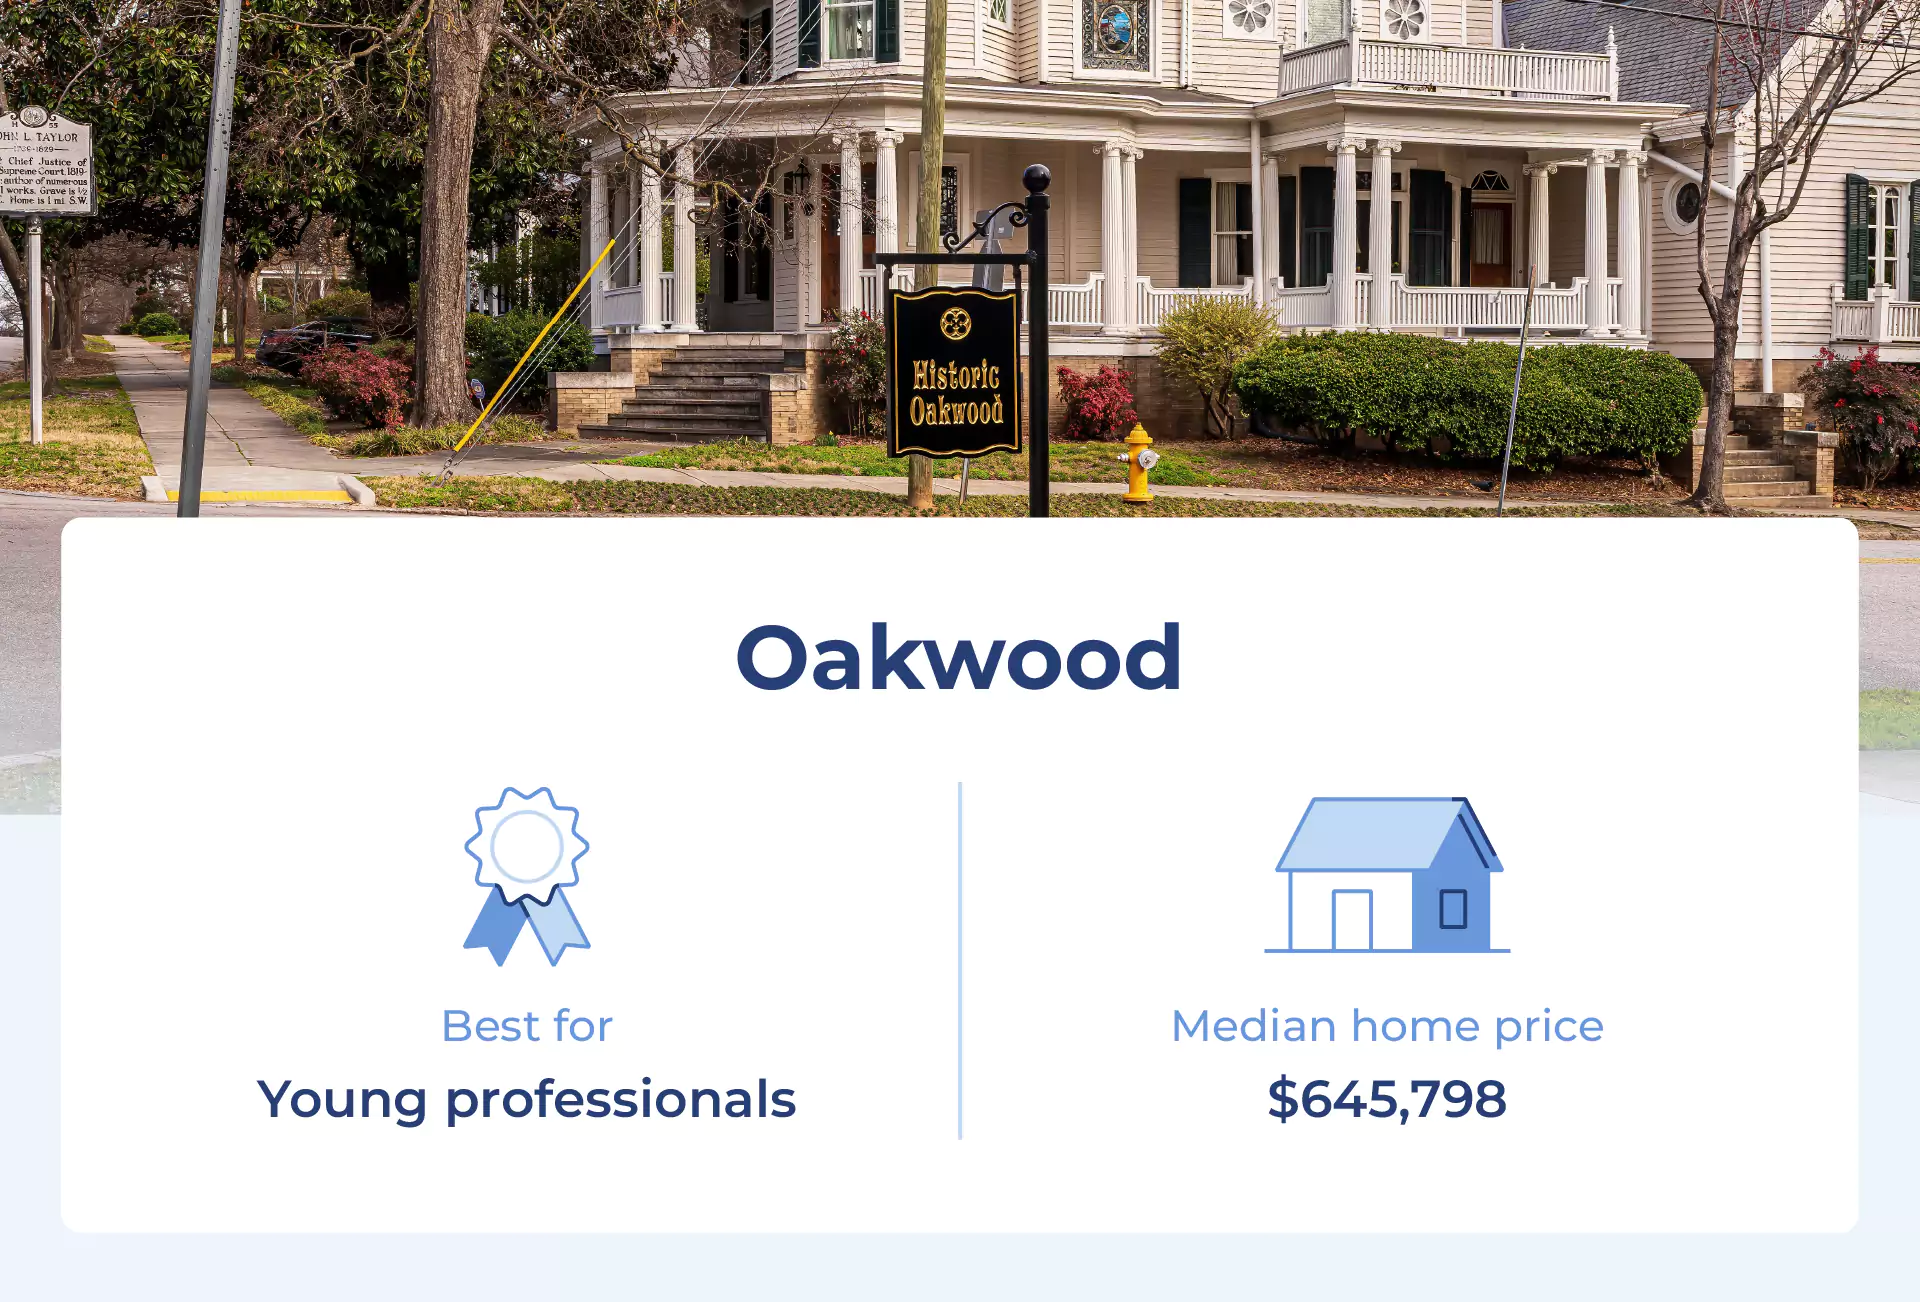 Image shows the median price for one of the best neighborhoods in Raleigh, Oakwood.